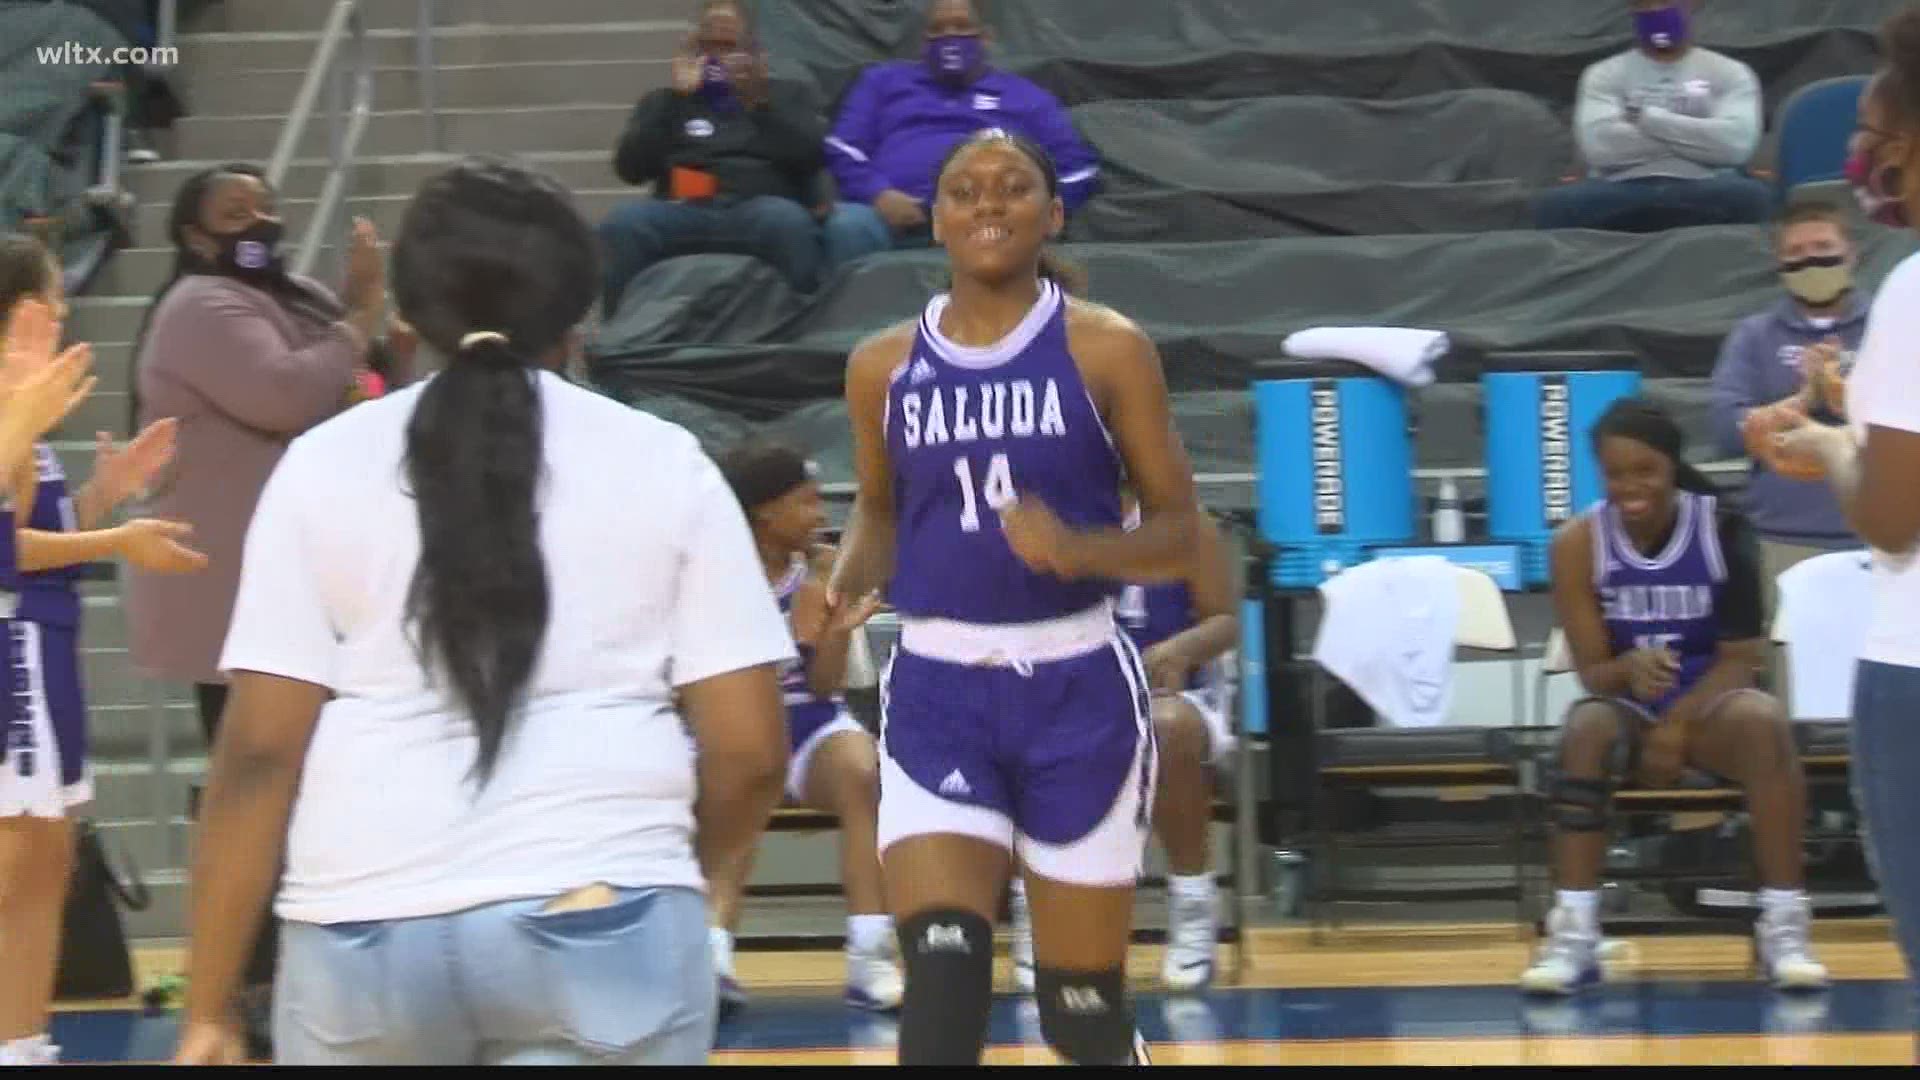 Saluda senior Kalisha Hill is a part of history as she is part of the first state championship team for girls basketball in school history.